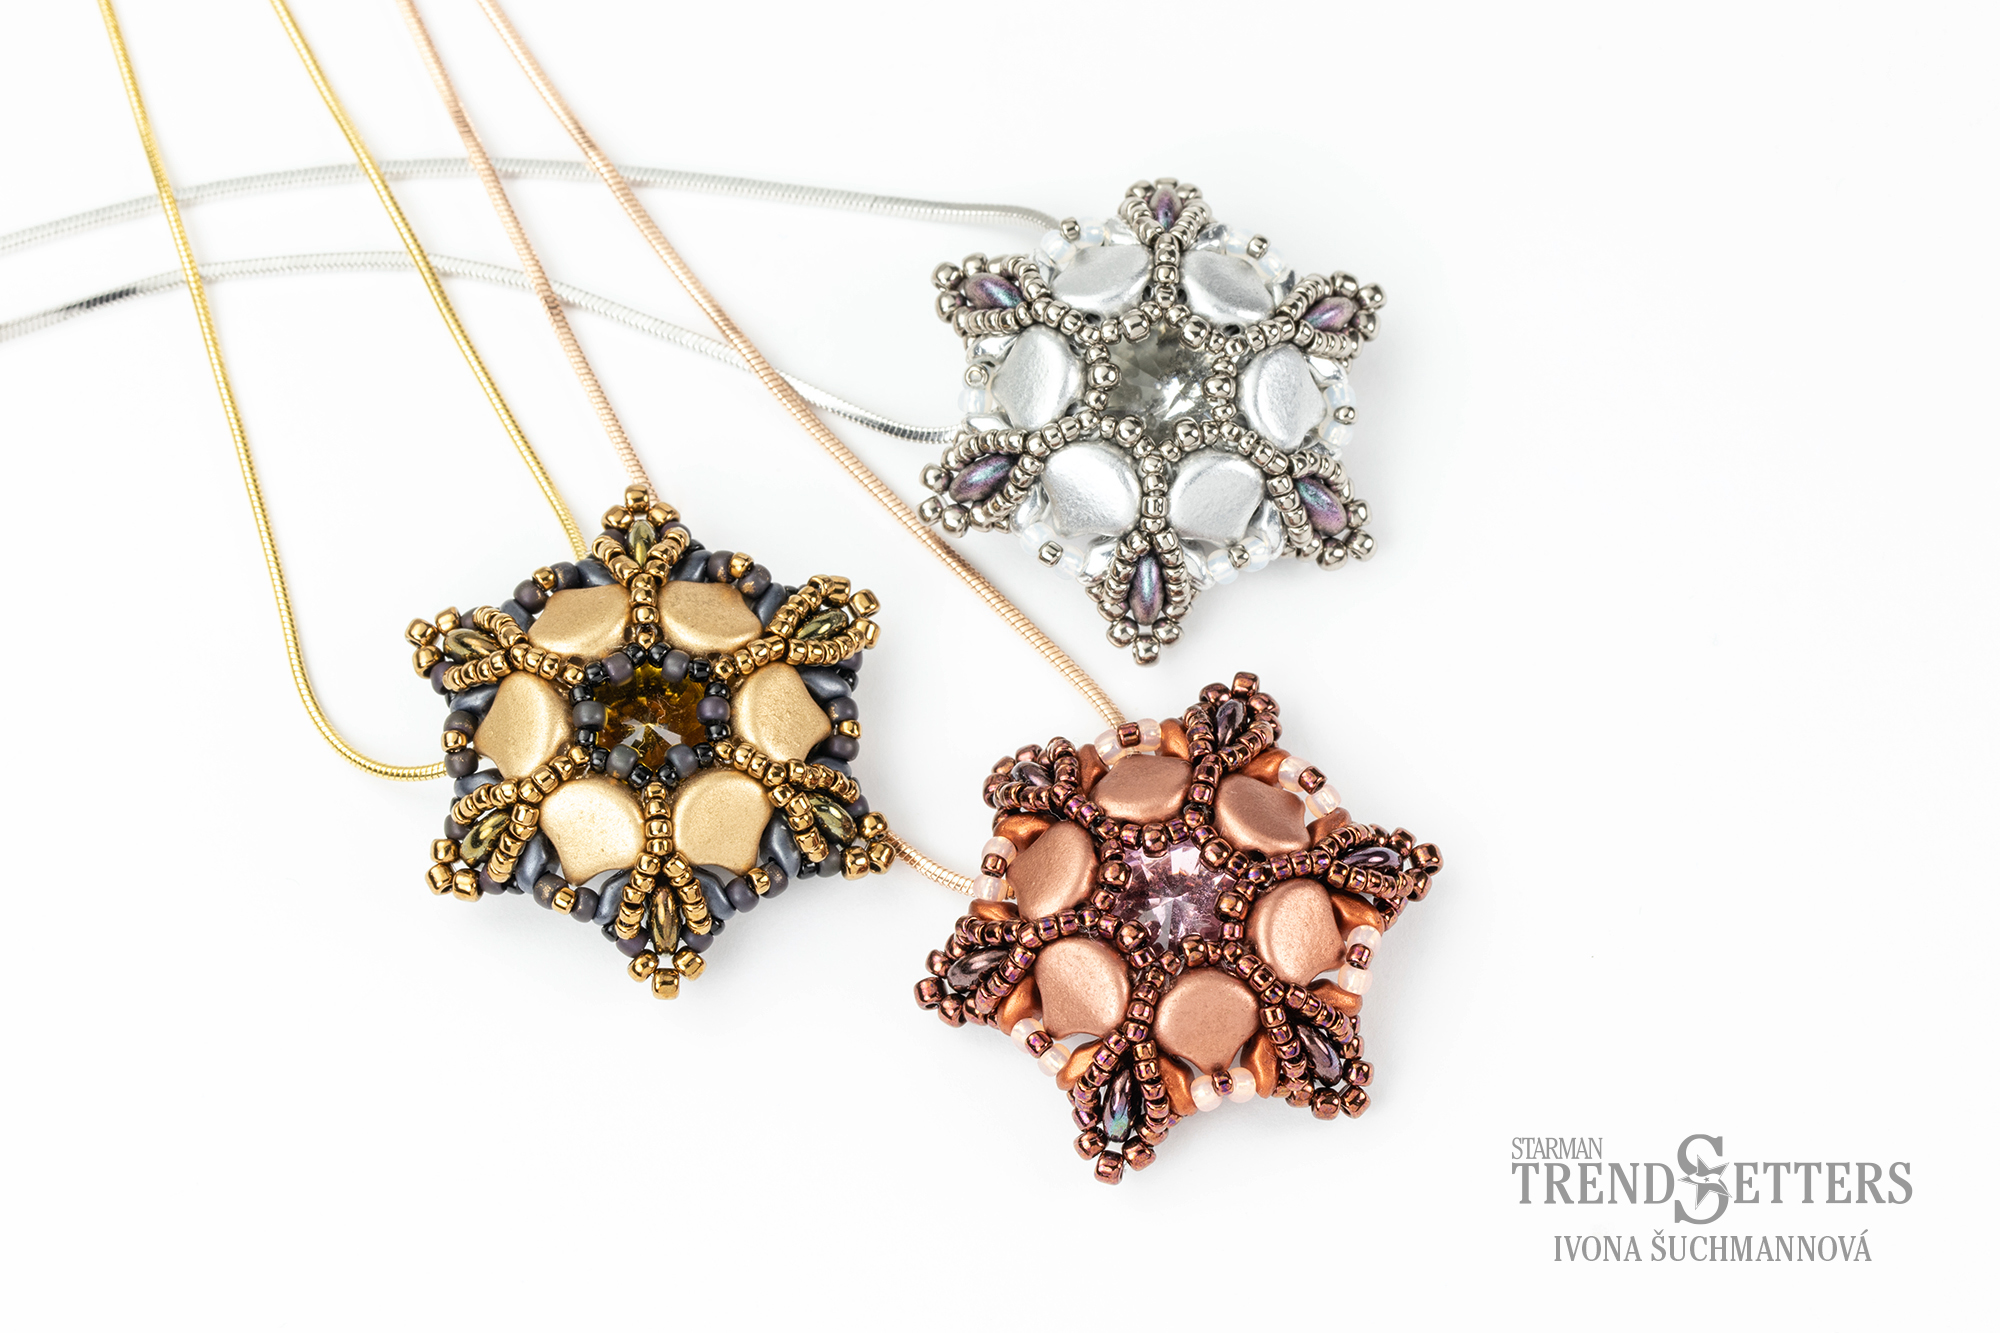 Download the Asterisk Pendant Pattern